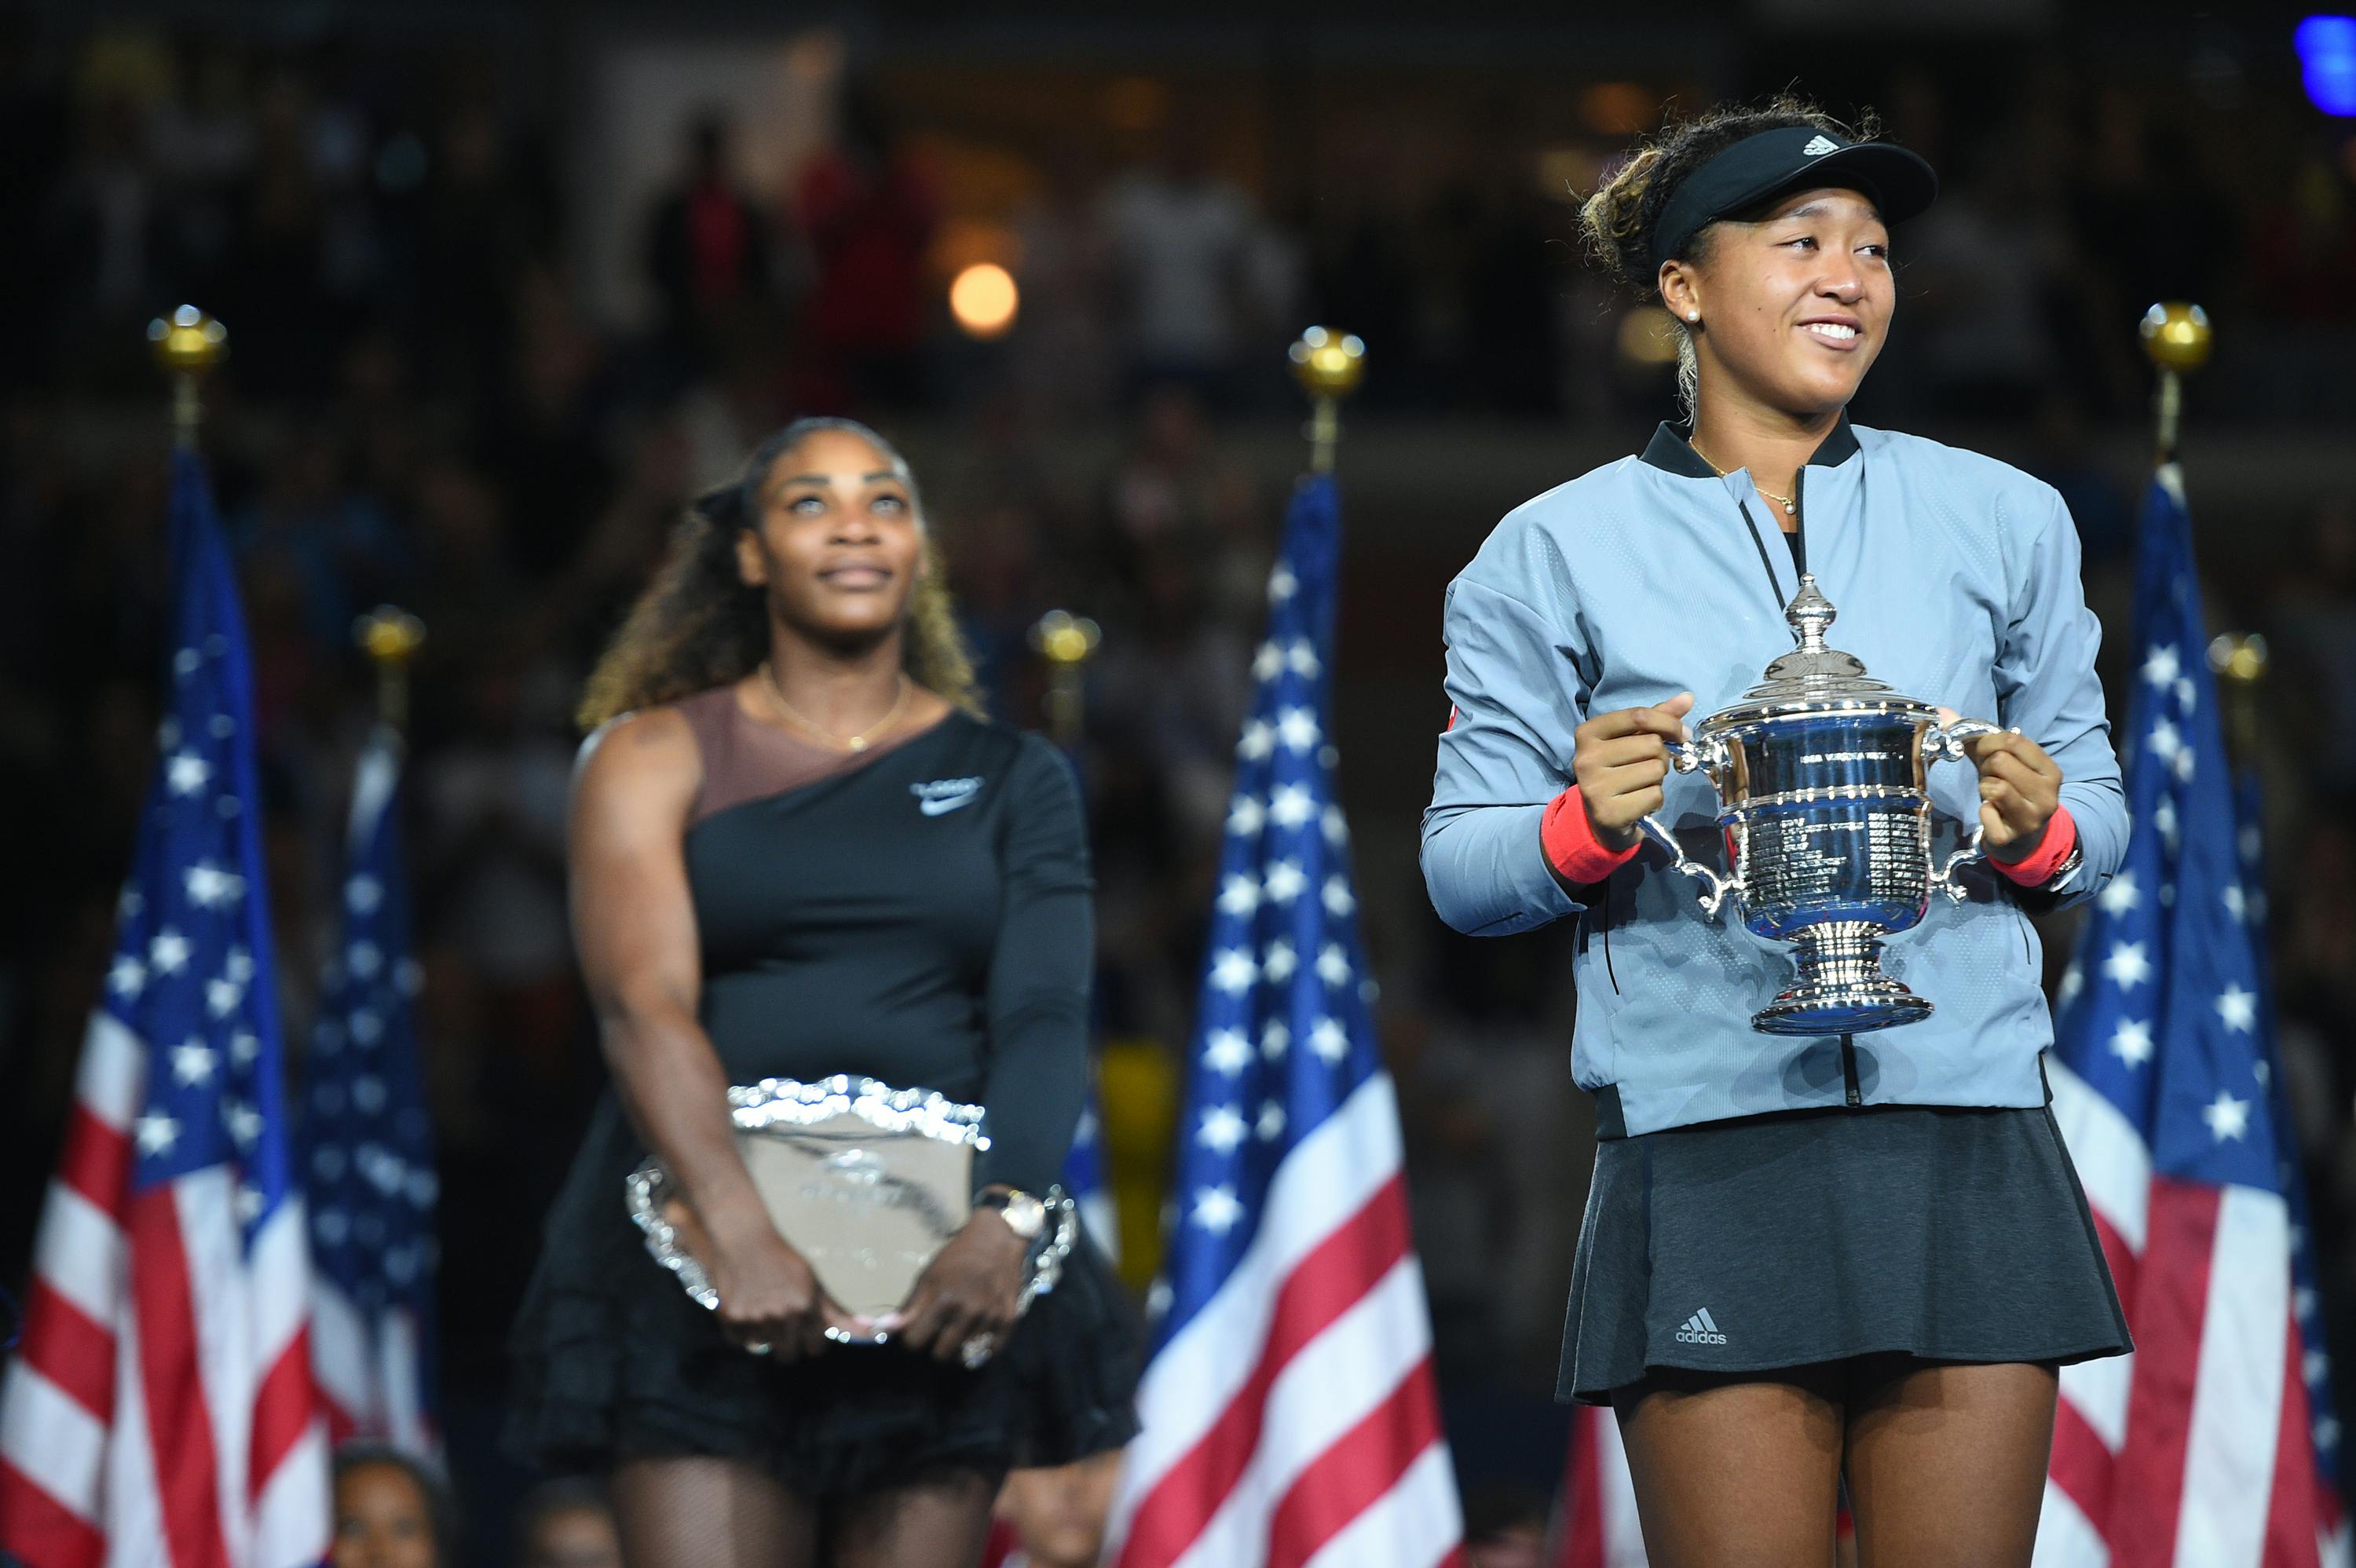 Naomi Osaka wins her maiden Grand Slam title at the 2018 US Open